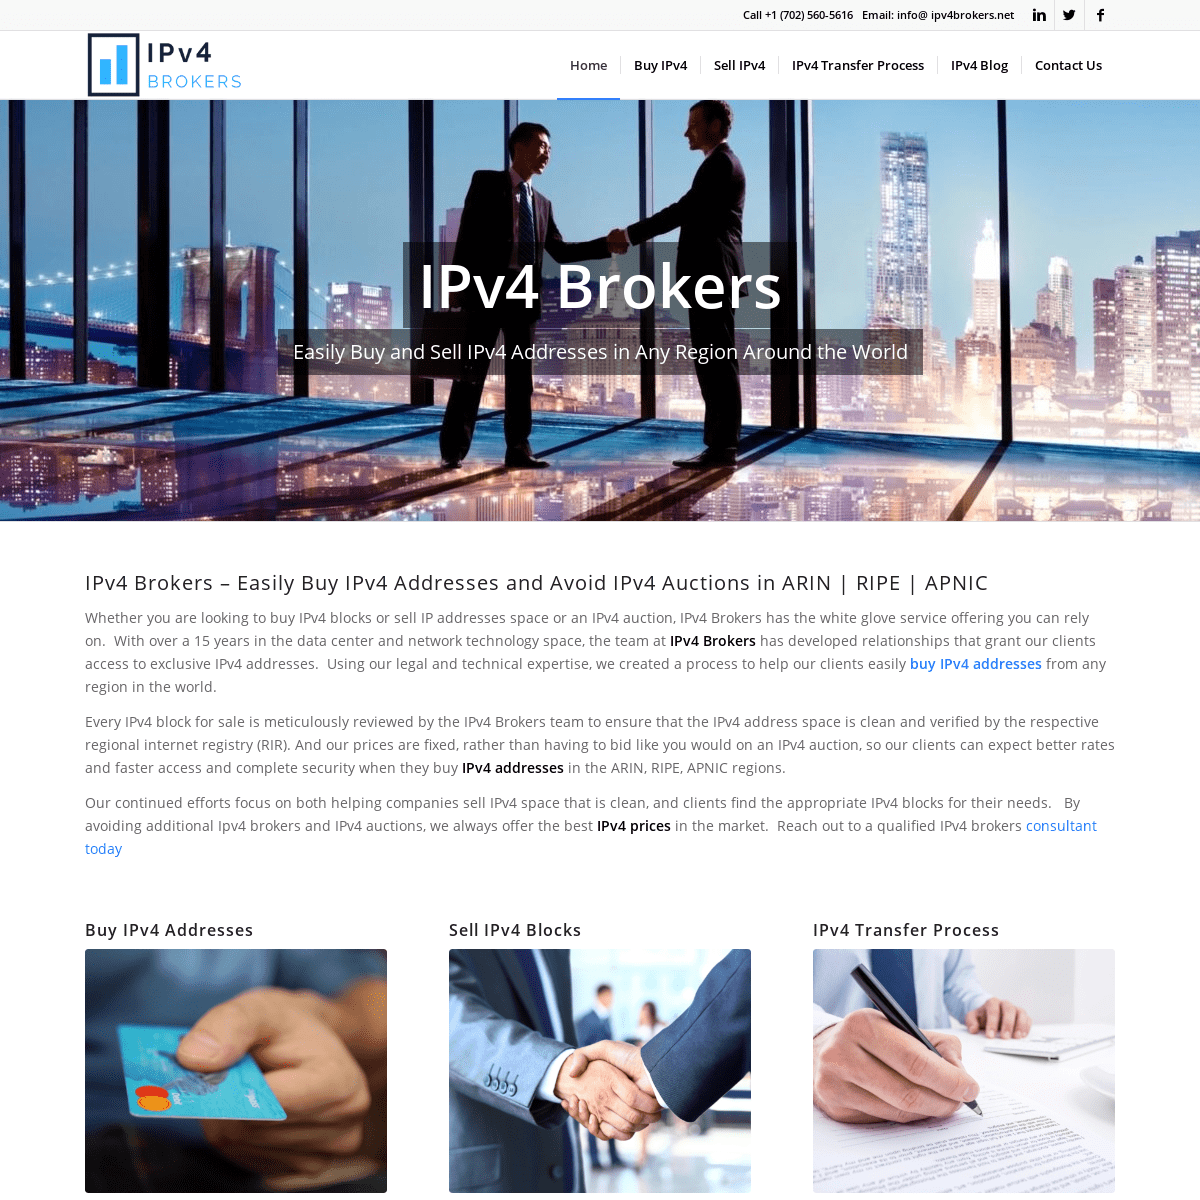 A complete backup of ipv4brokers.net